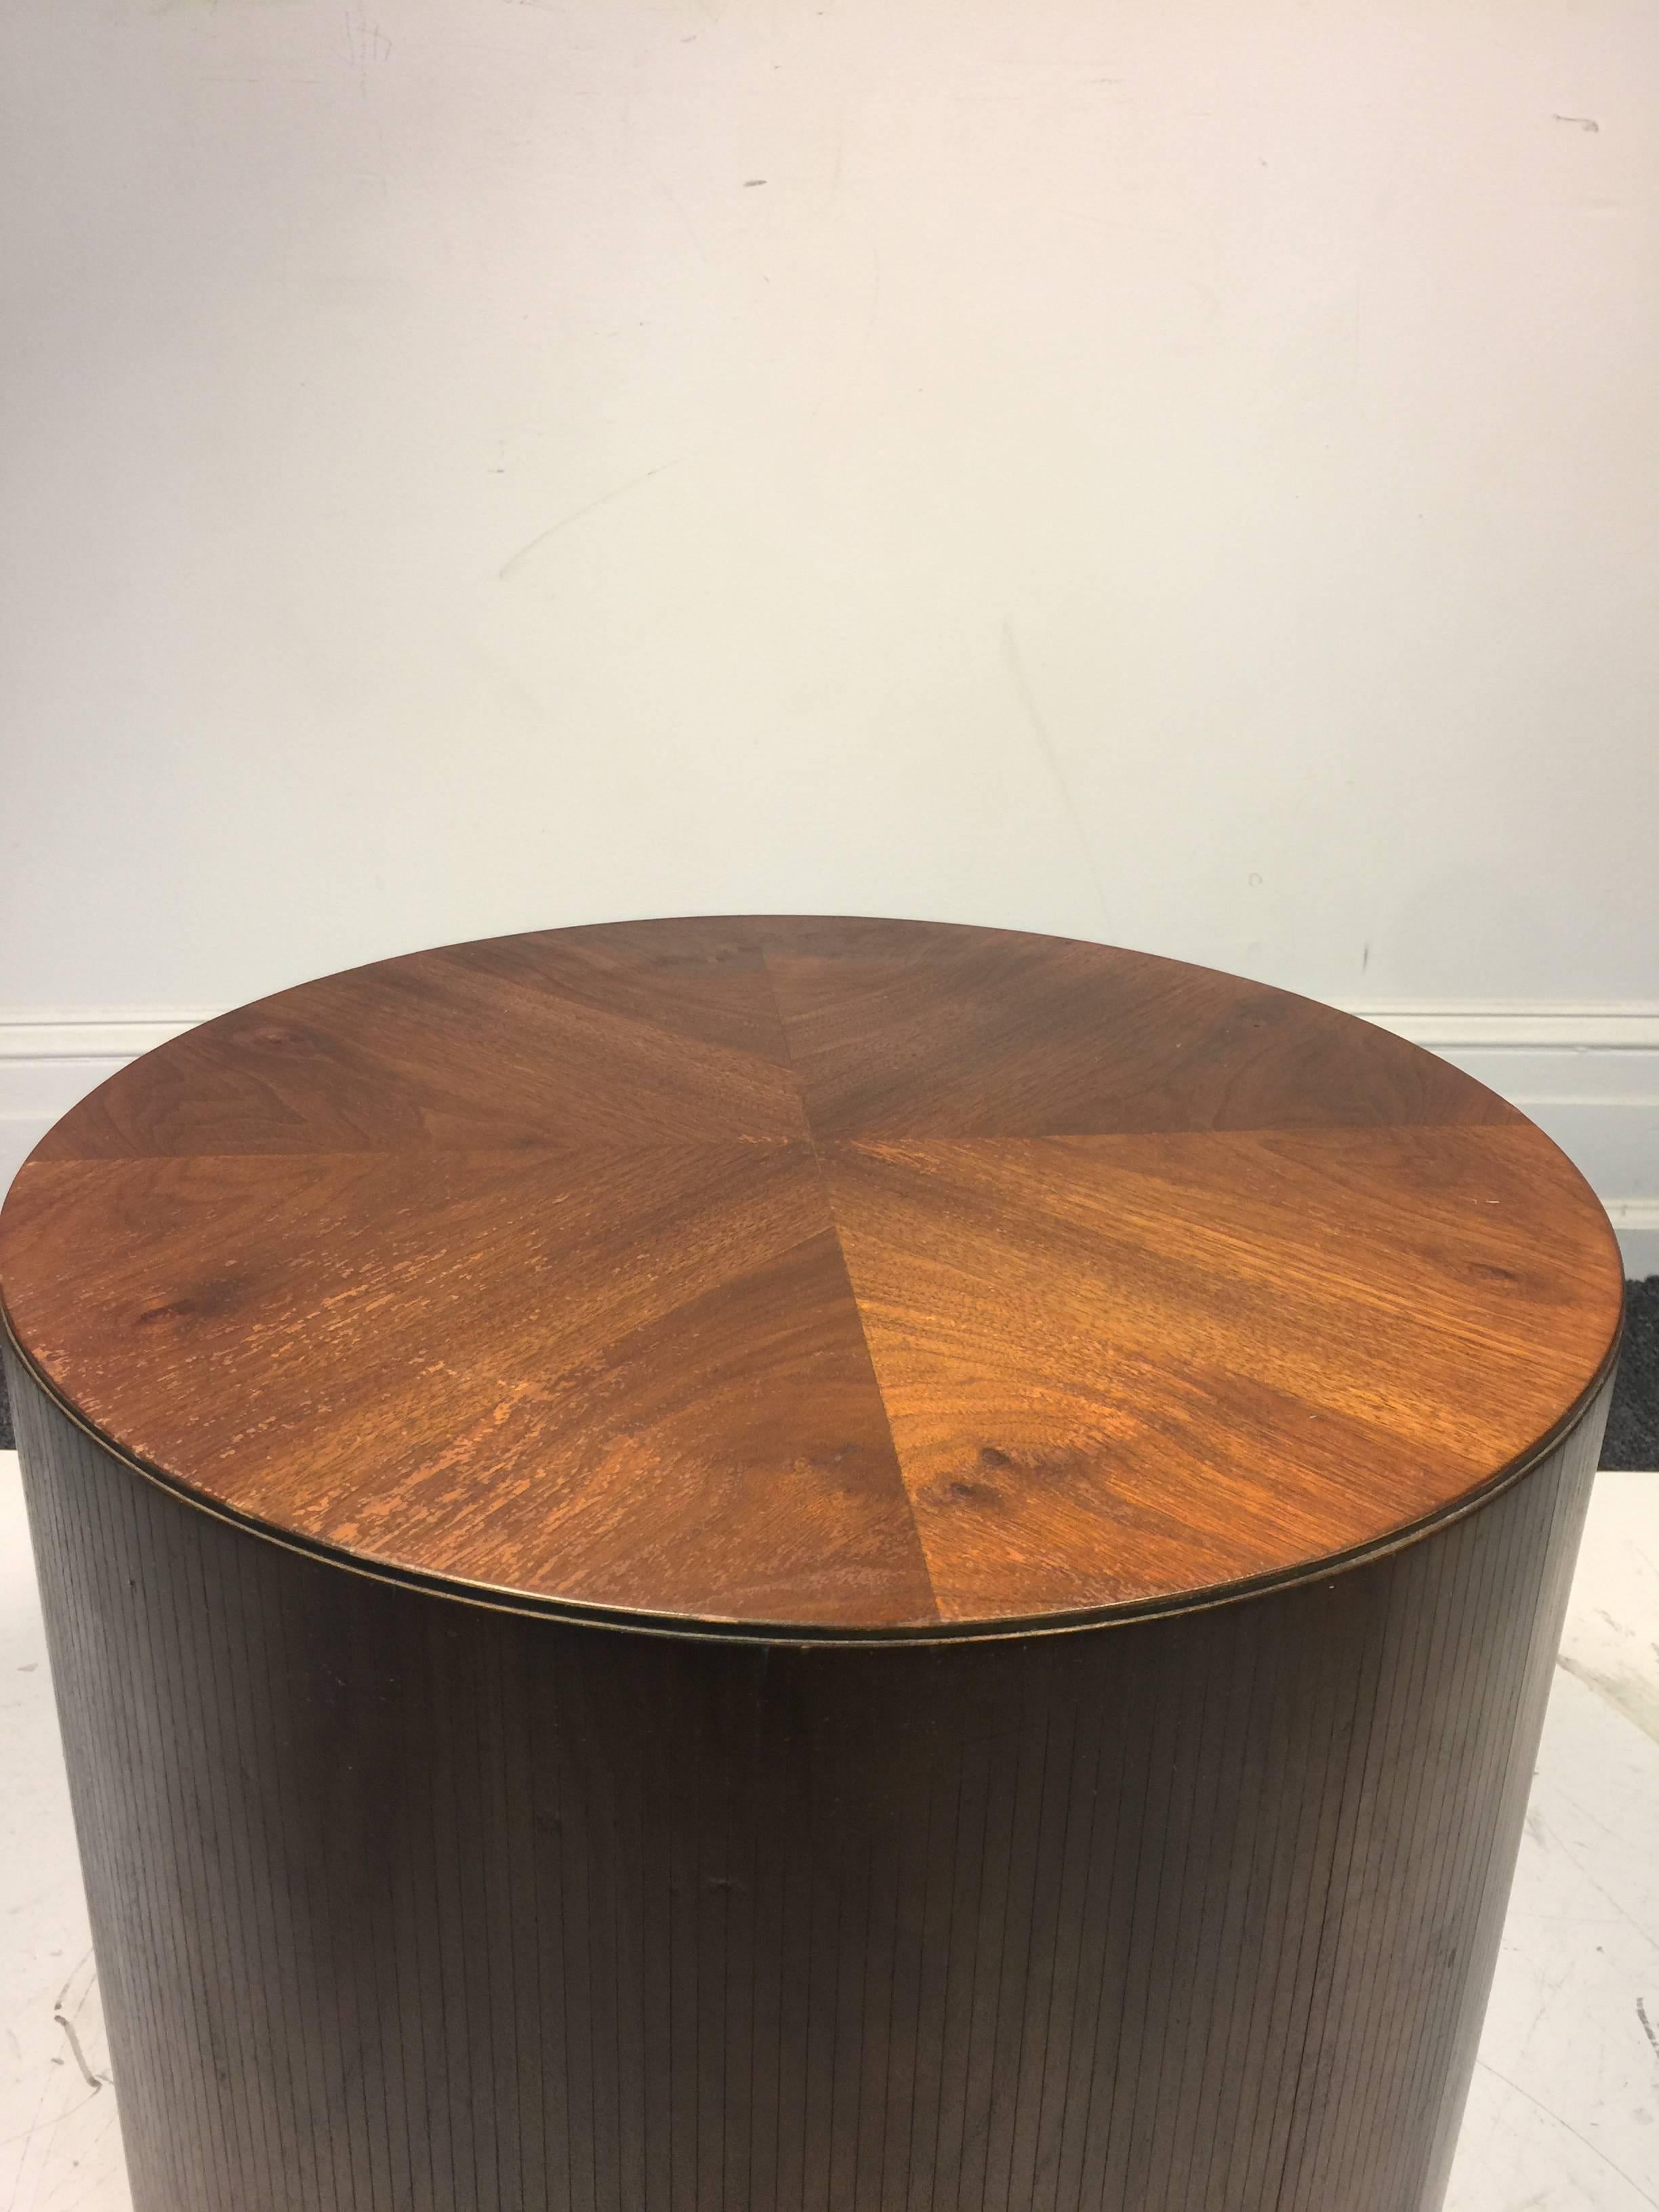 Substantial Drum Table or Pedestal by Lane For Sale 1